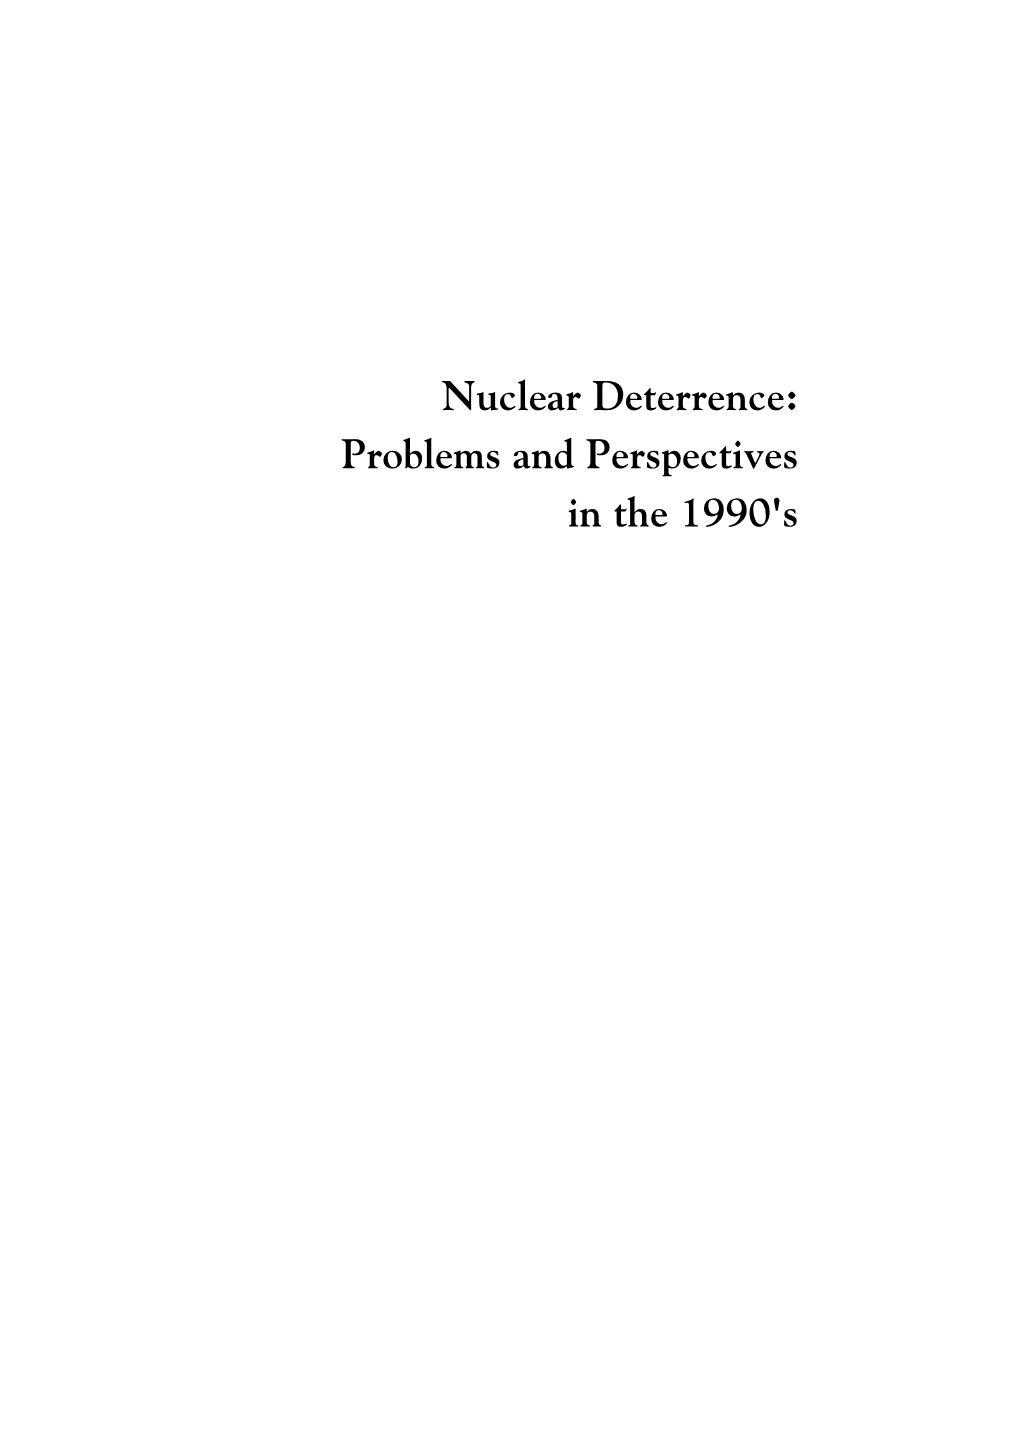 Nuclear Deterrence: Problems and Perspectives in the 1990'S UNIDIR/93/26